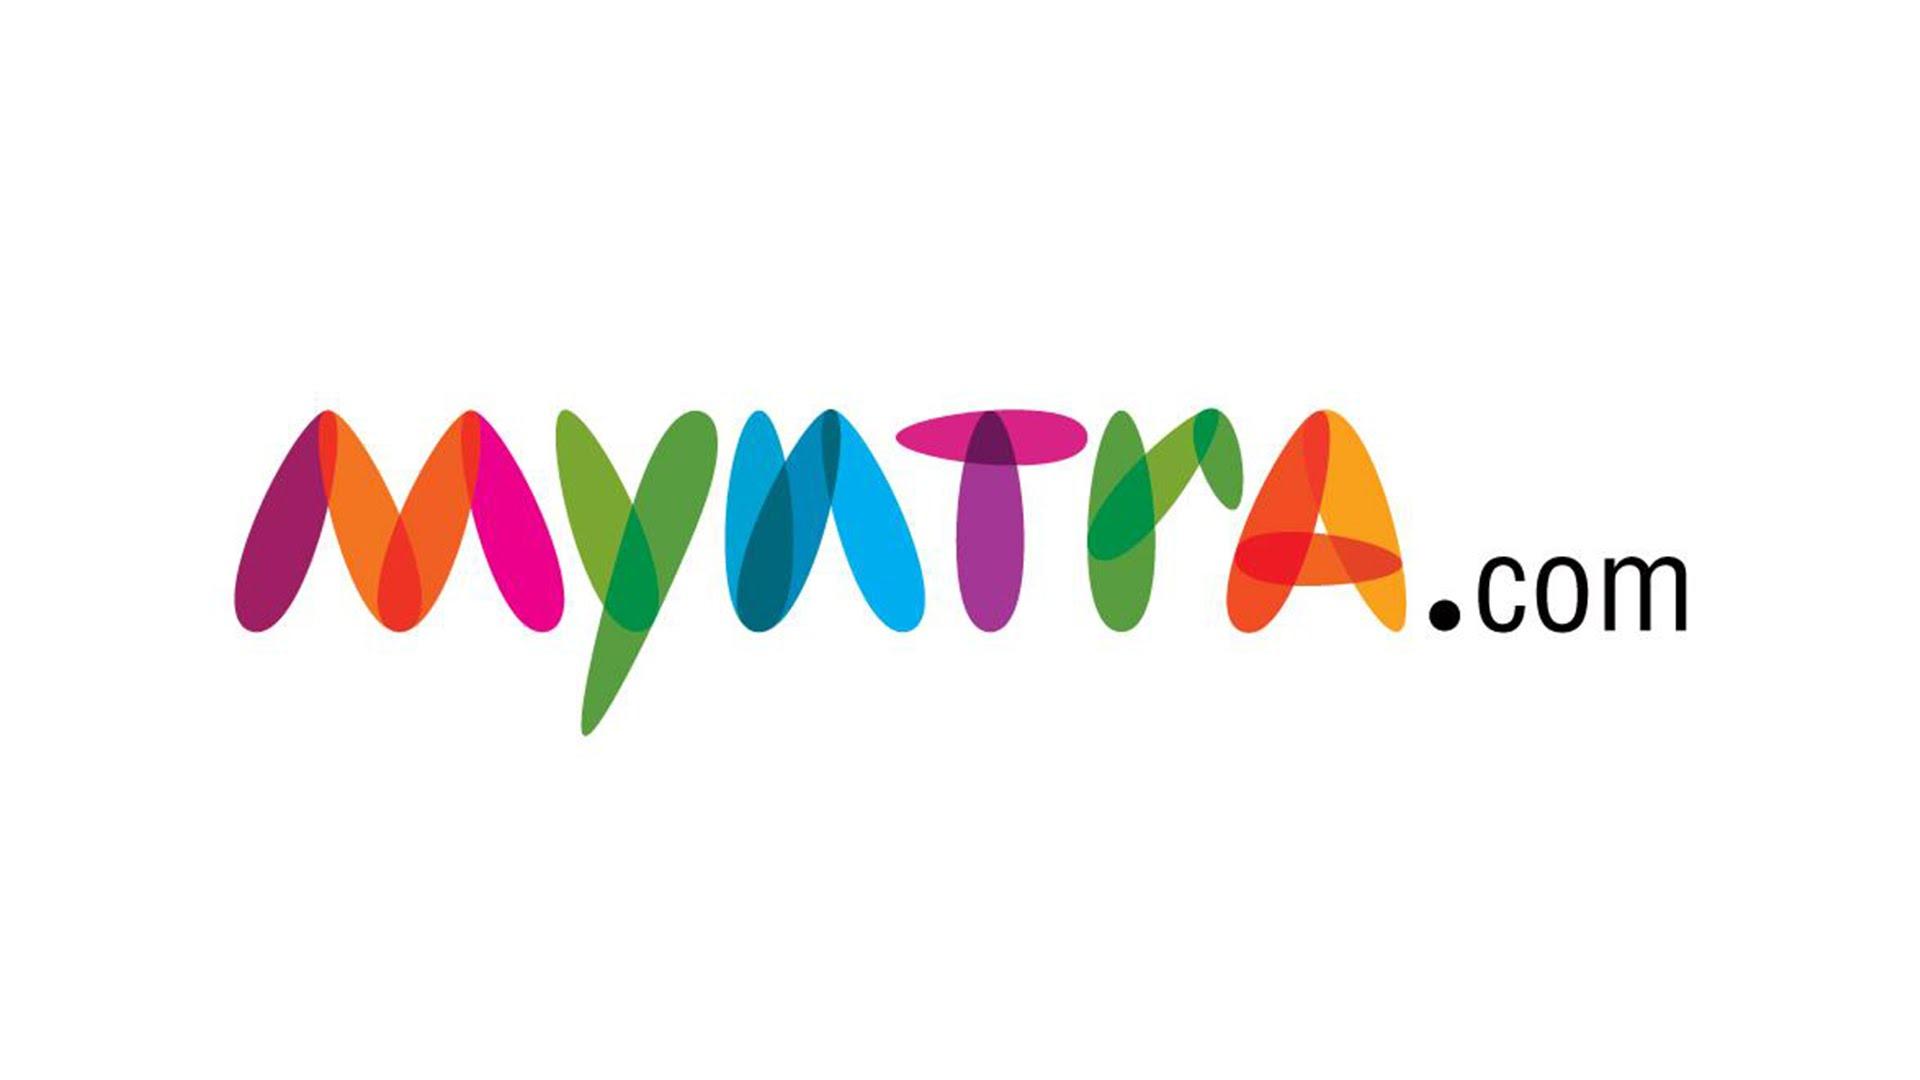 Myntra to change logo after NGO calls it offensive to women Report   Exchange4media